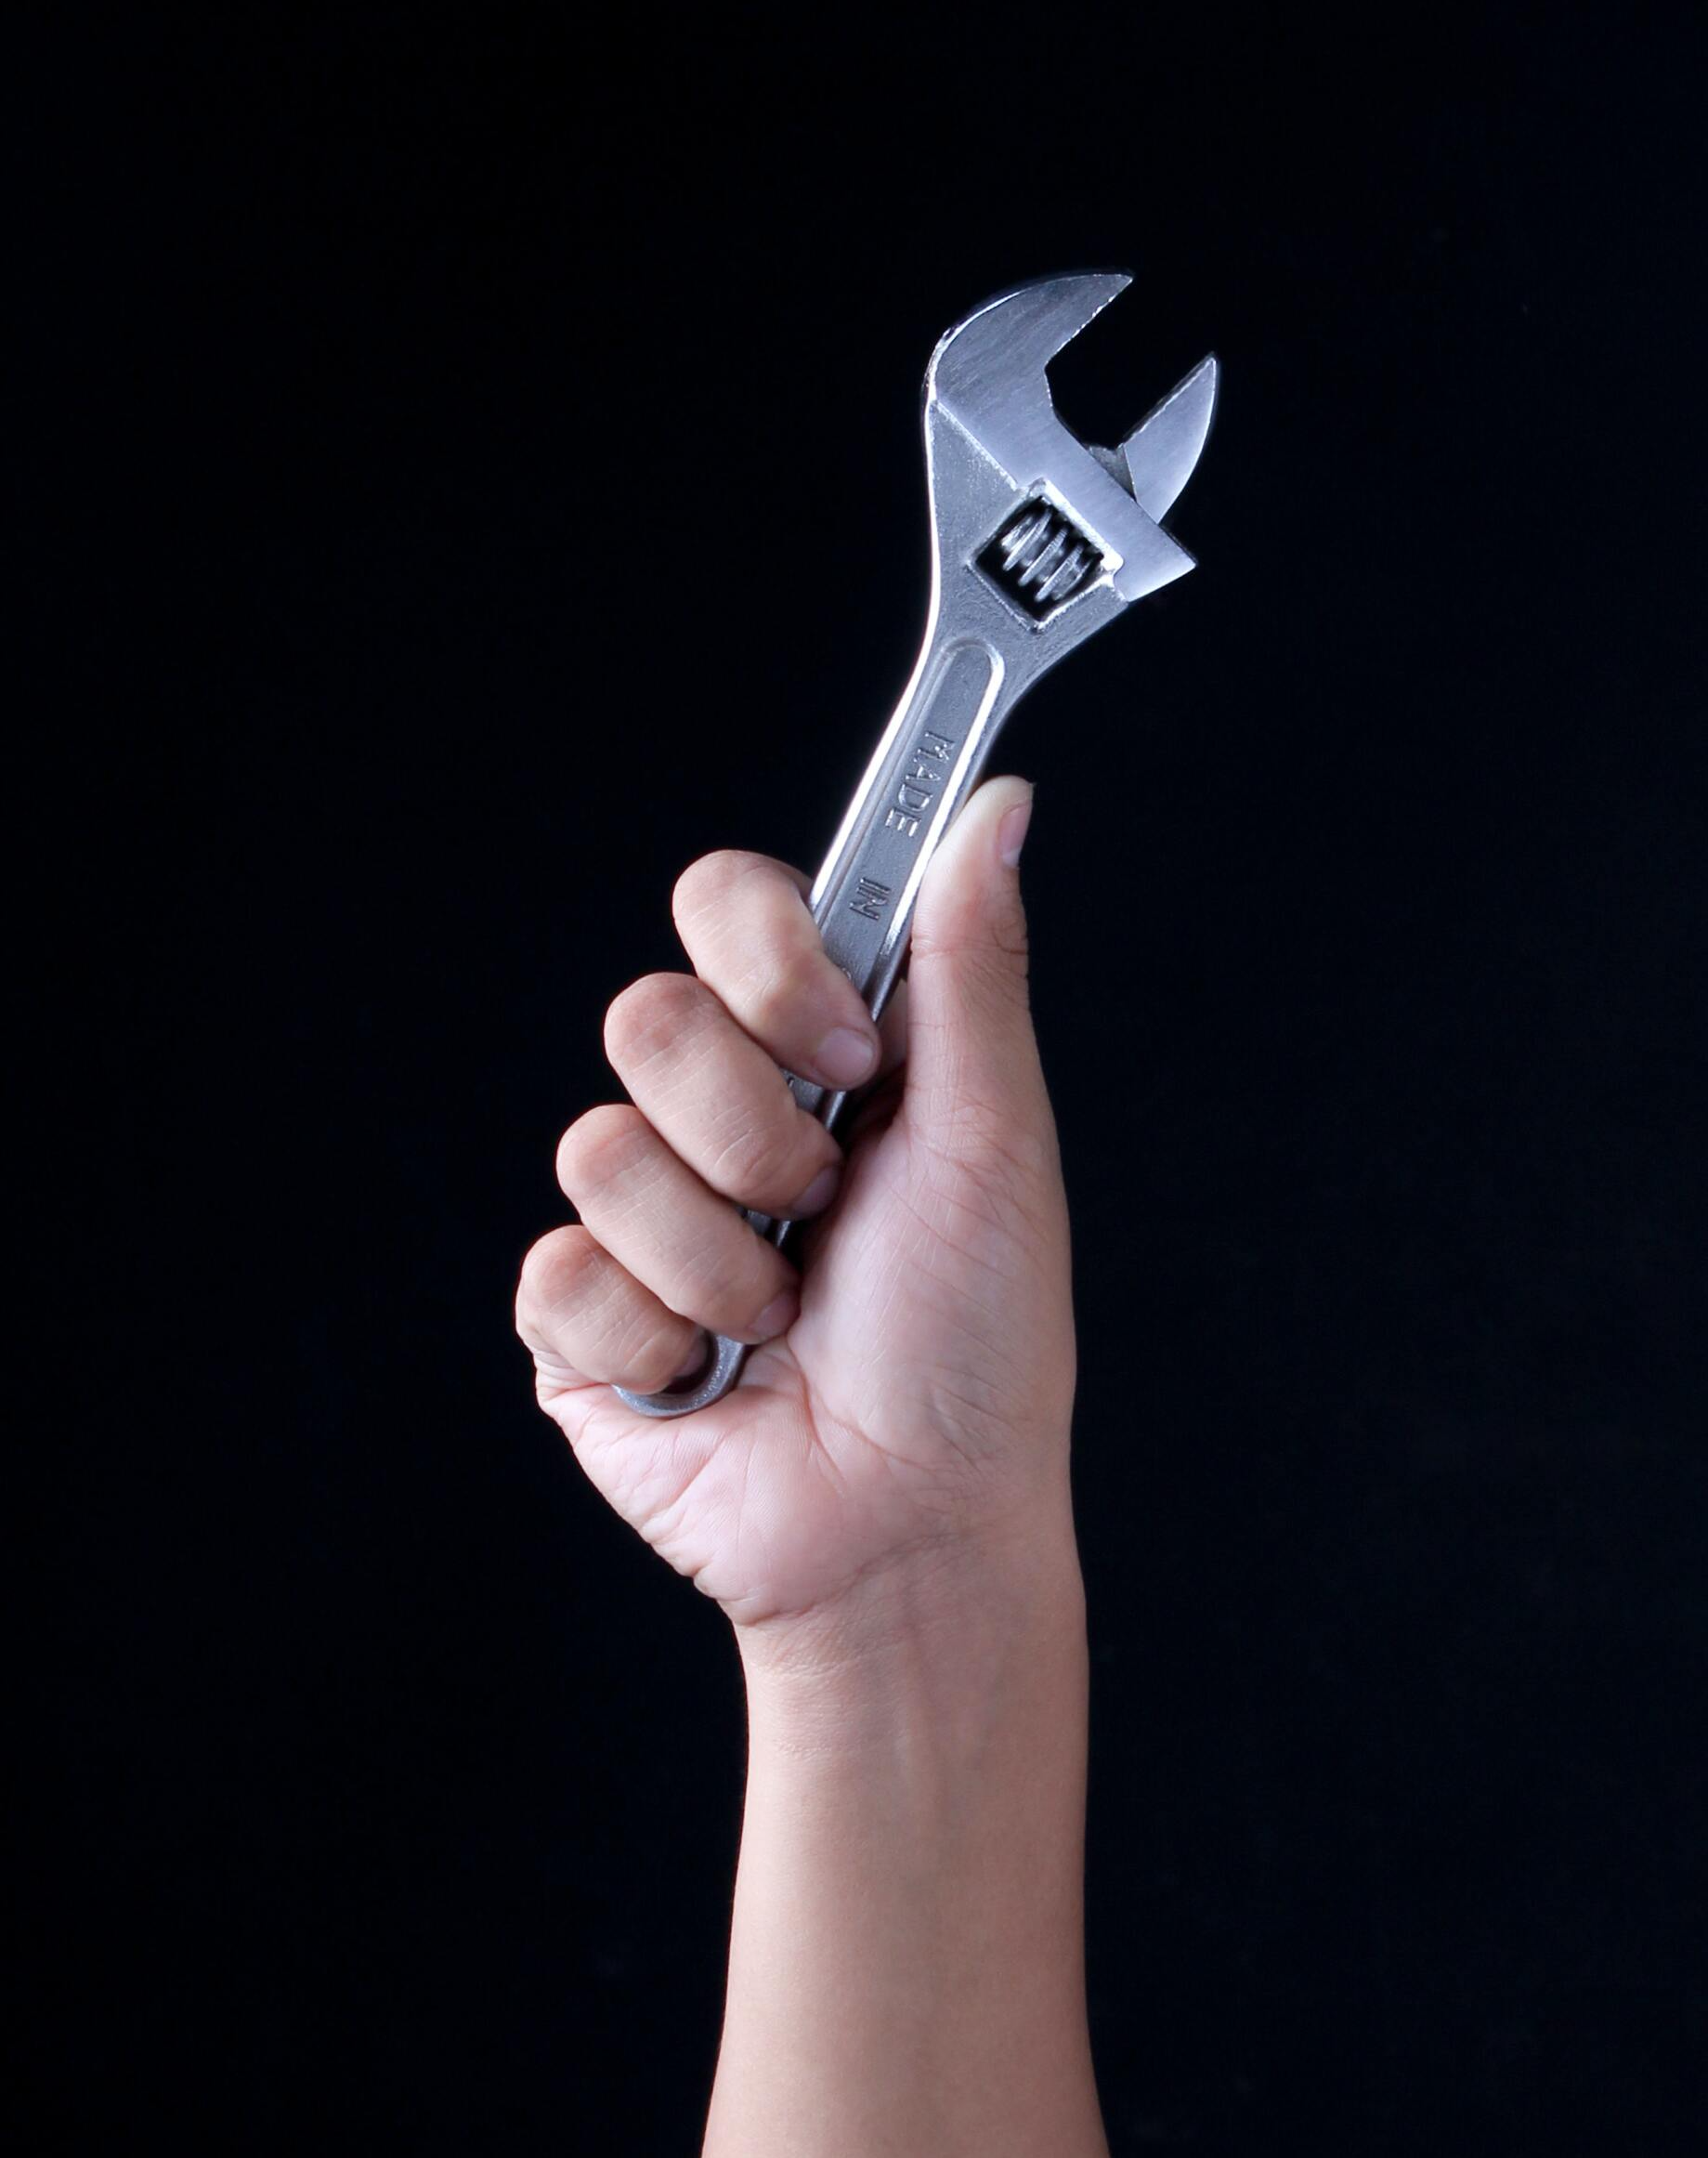 hand holding a wrench